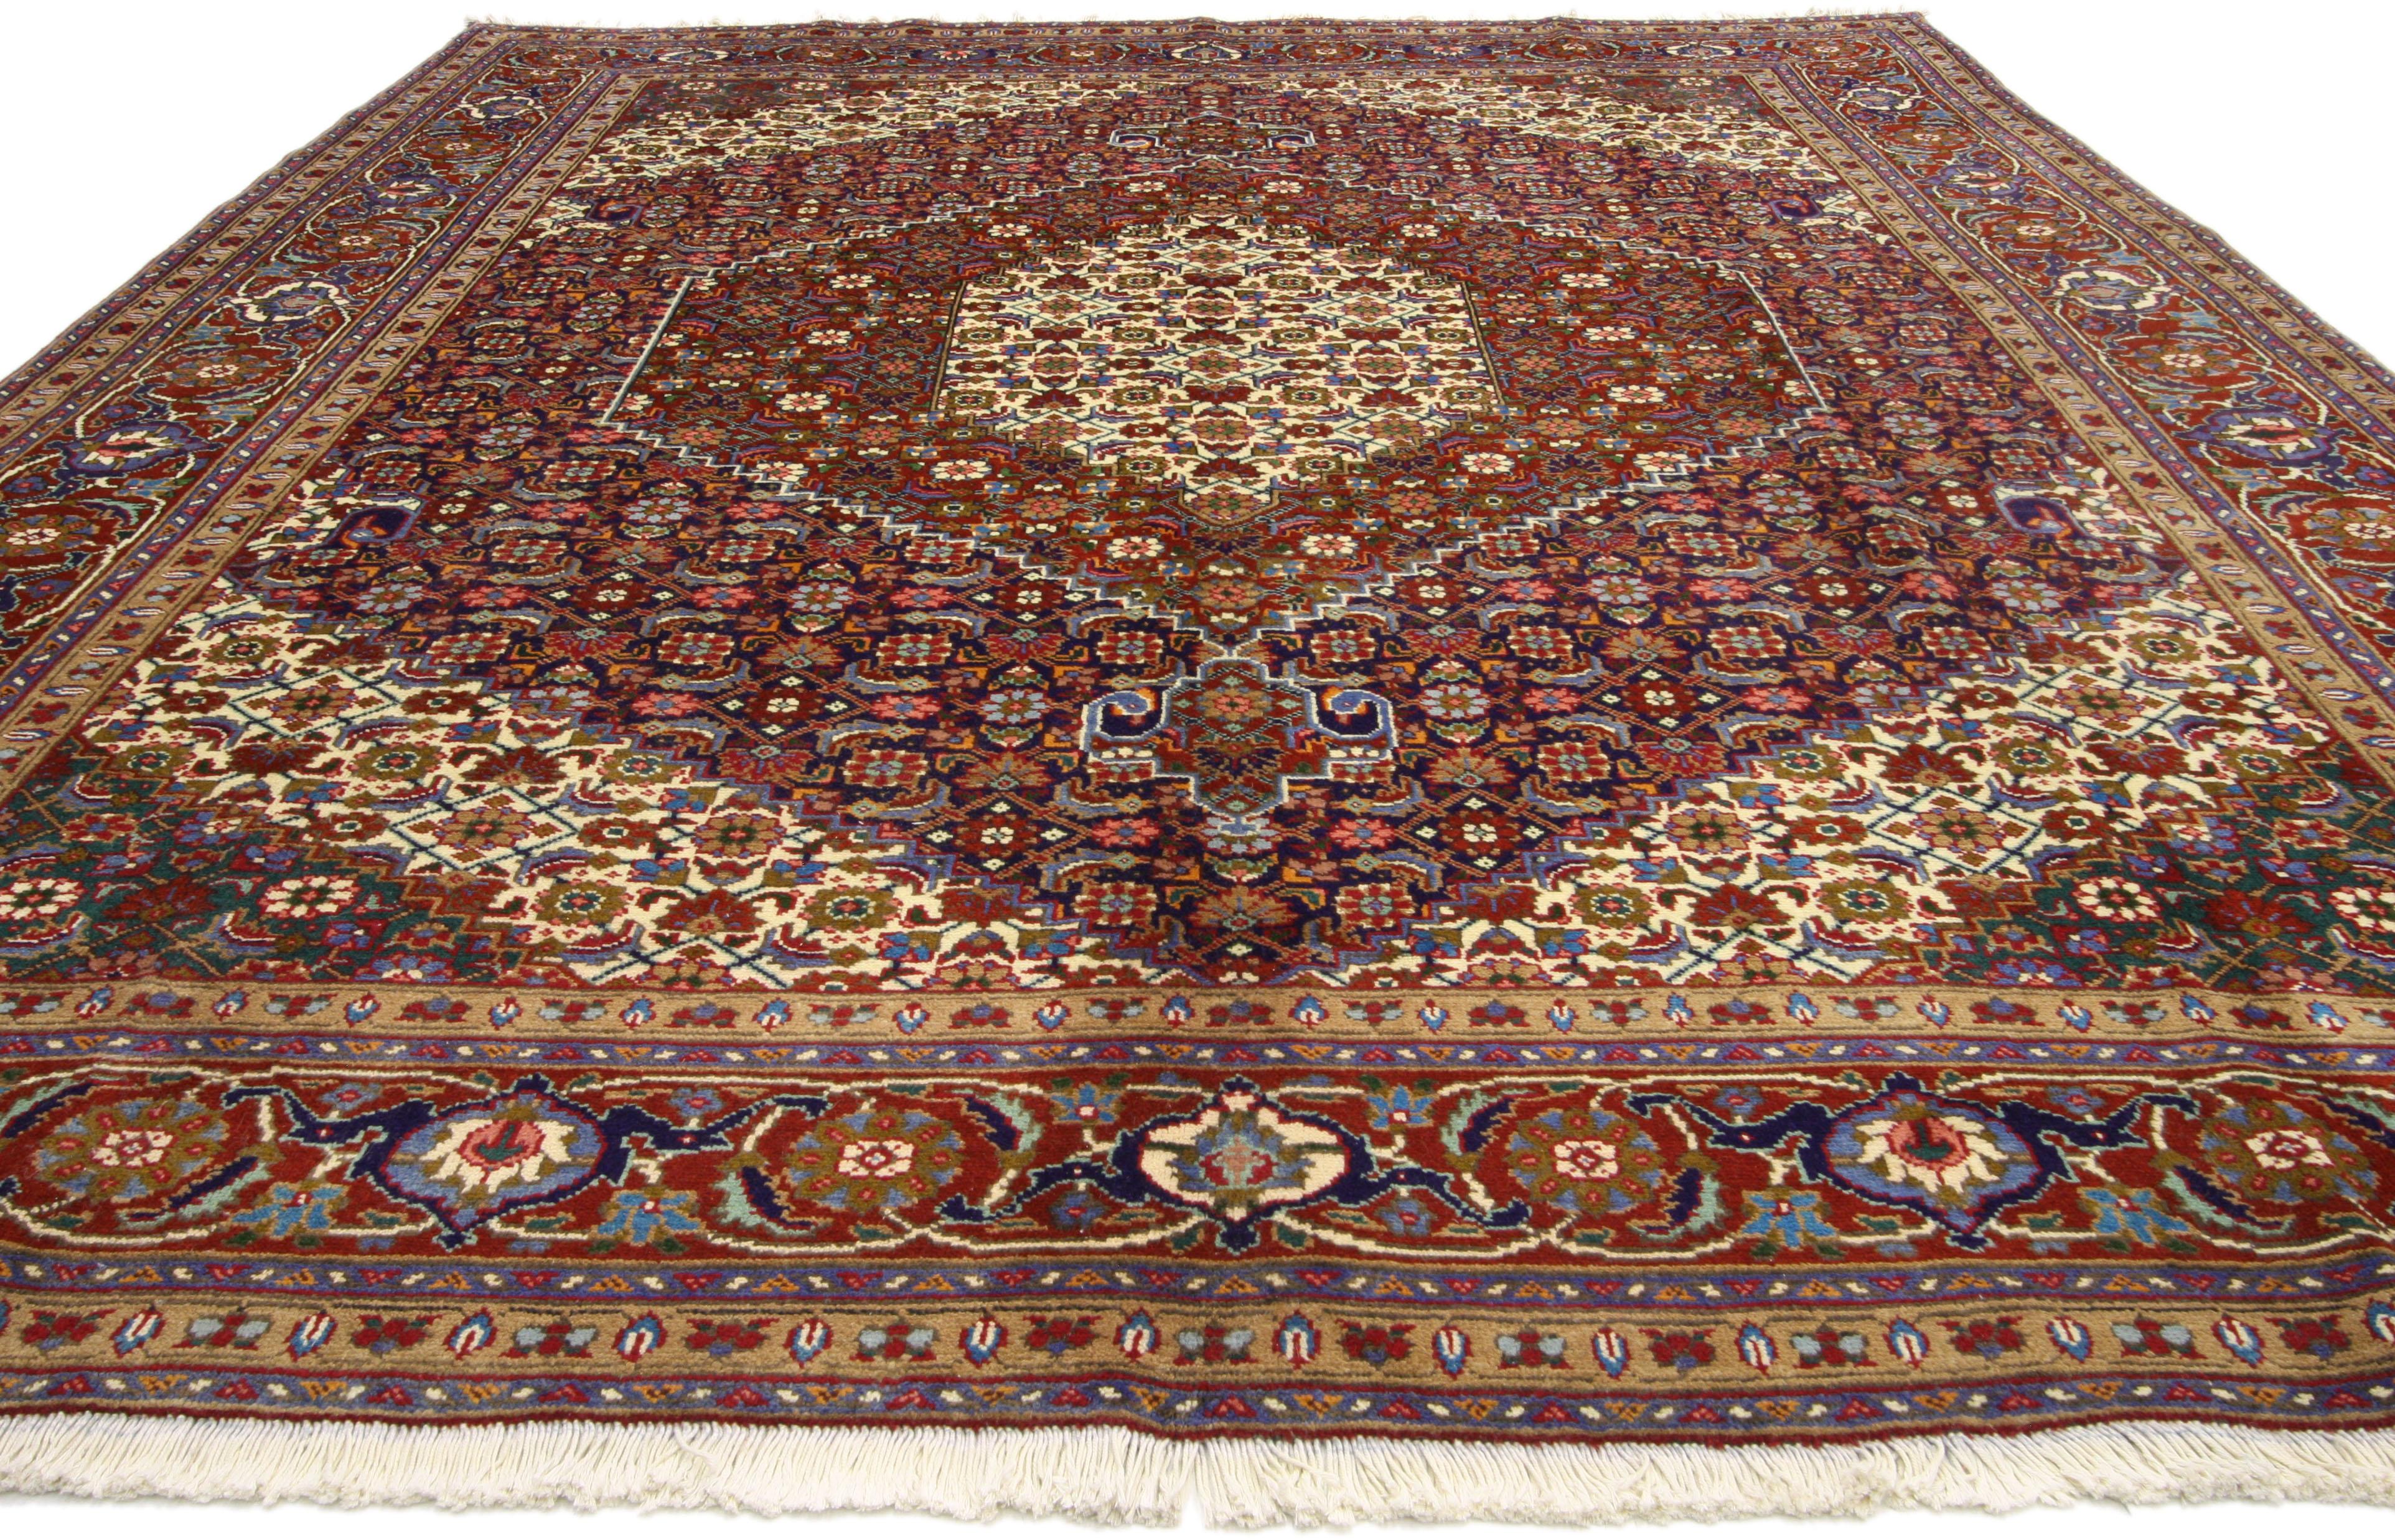 76150, vintage Persian Azerbaijan area rug with Mahi fish design Manor House style. This hand knotted wool vintage Persian Azerbaijan rug beautifully showcases a Mahi Fish Design in a rich jewel-tone color palette. A grandeur lozenge and two